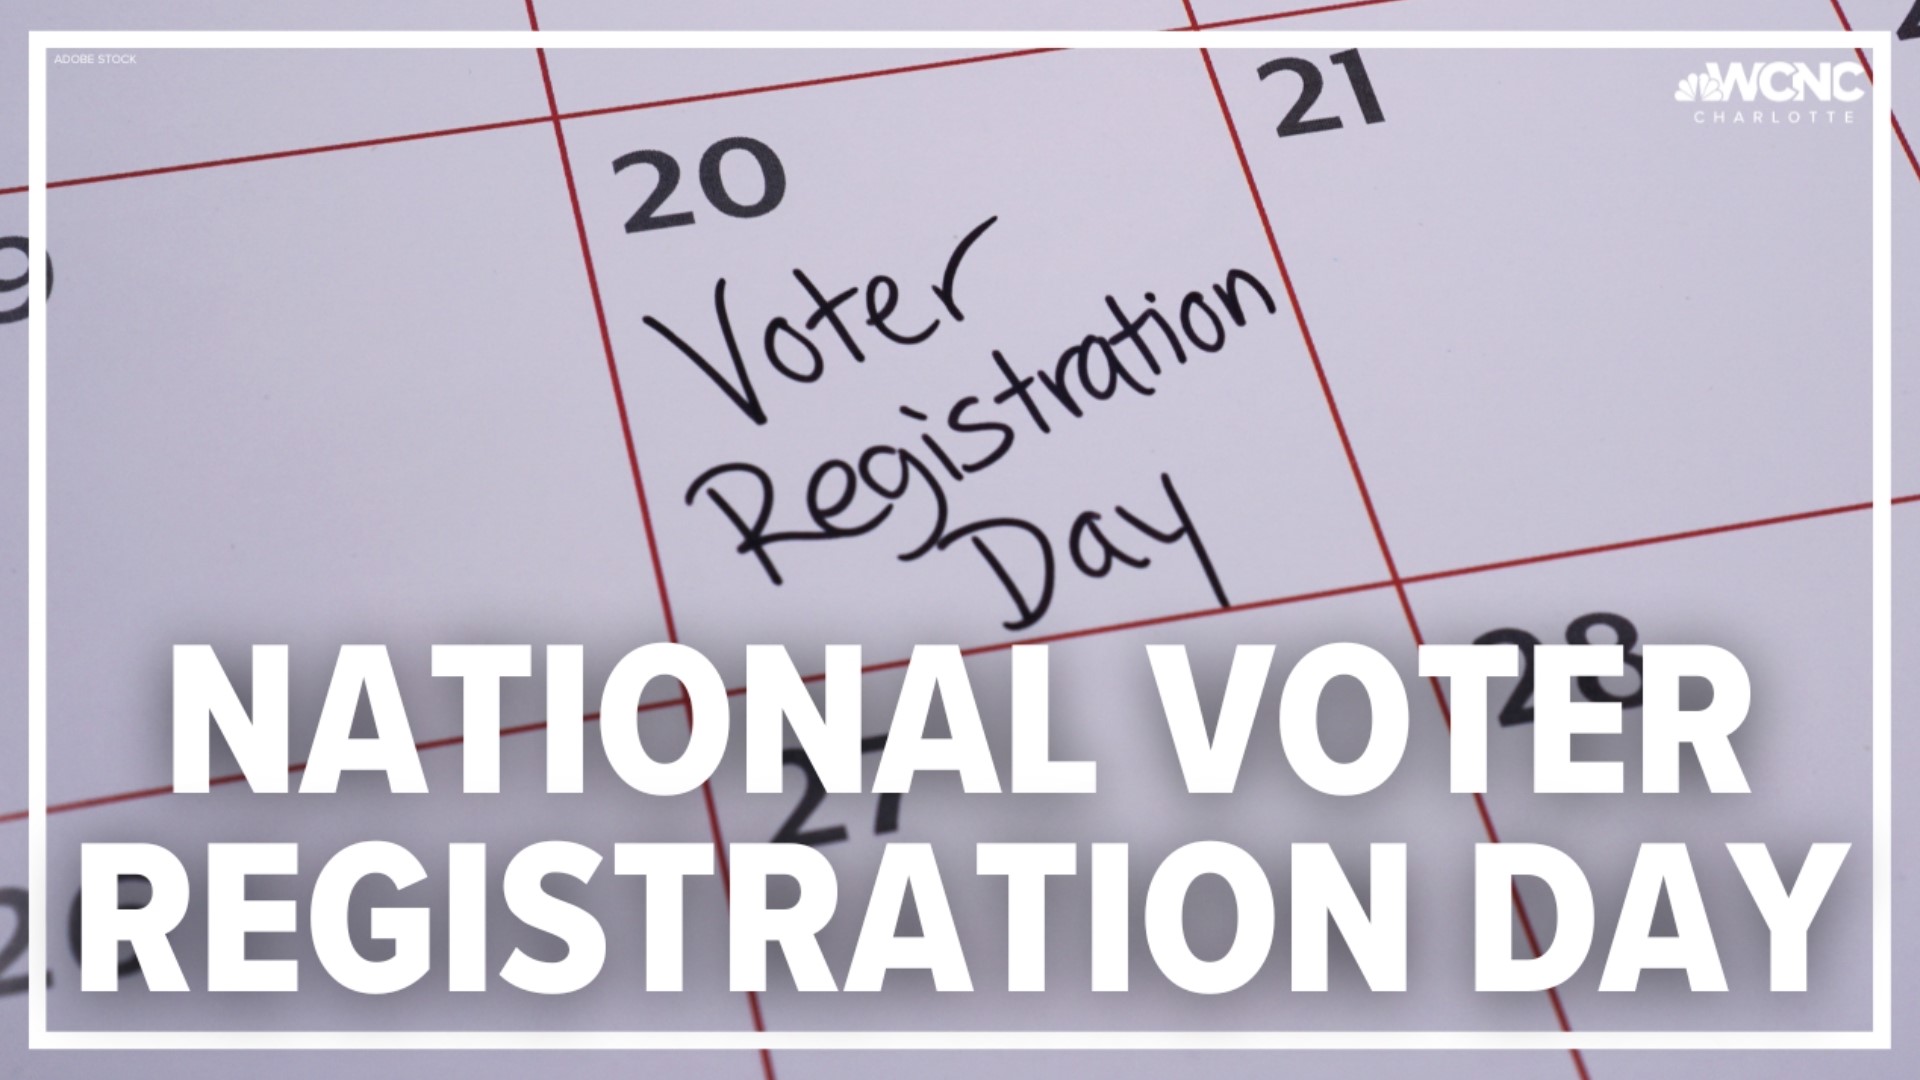 In North Carolina, you have until Friday, Oct. 14 to register to vote.